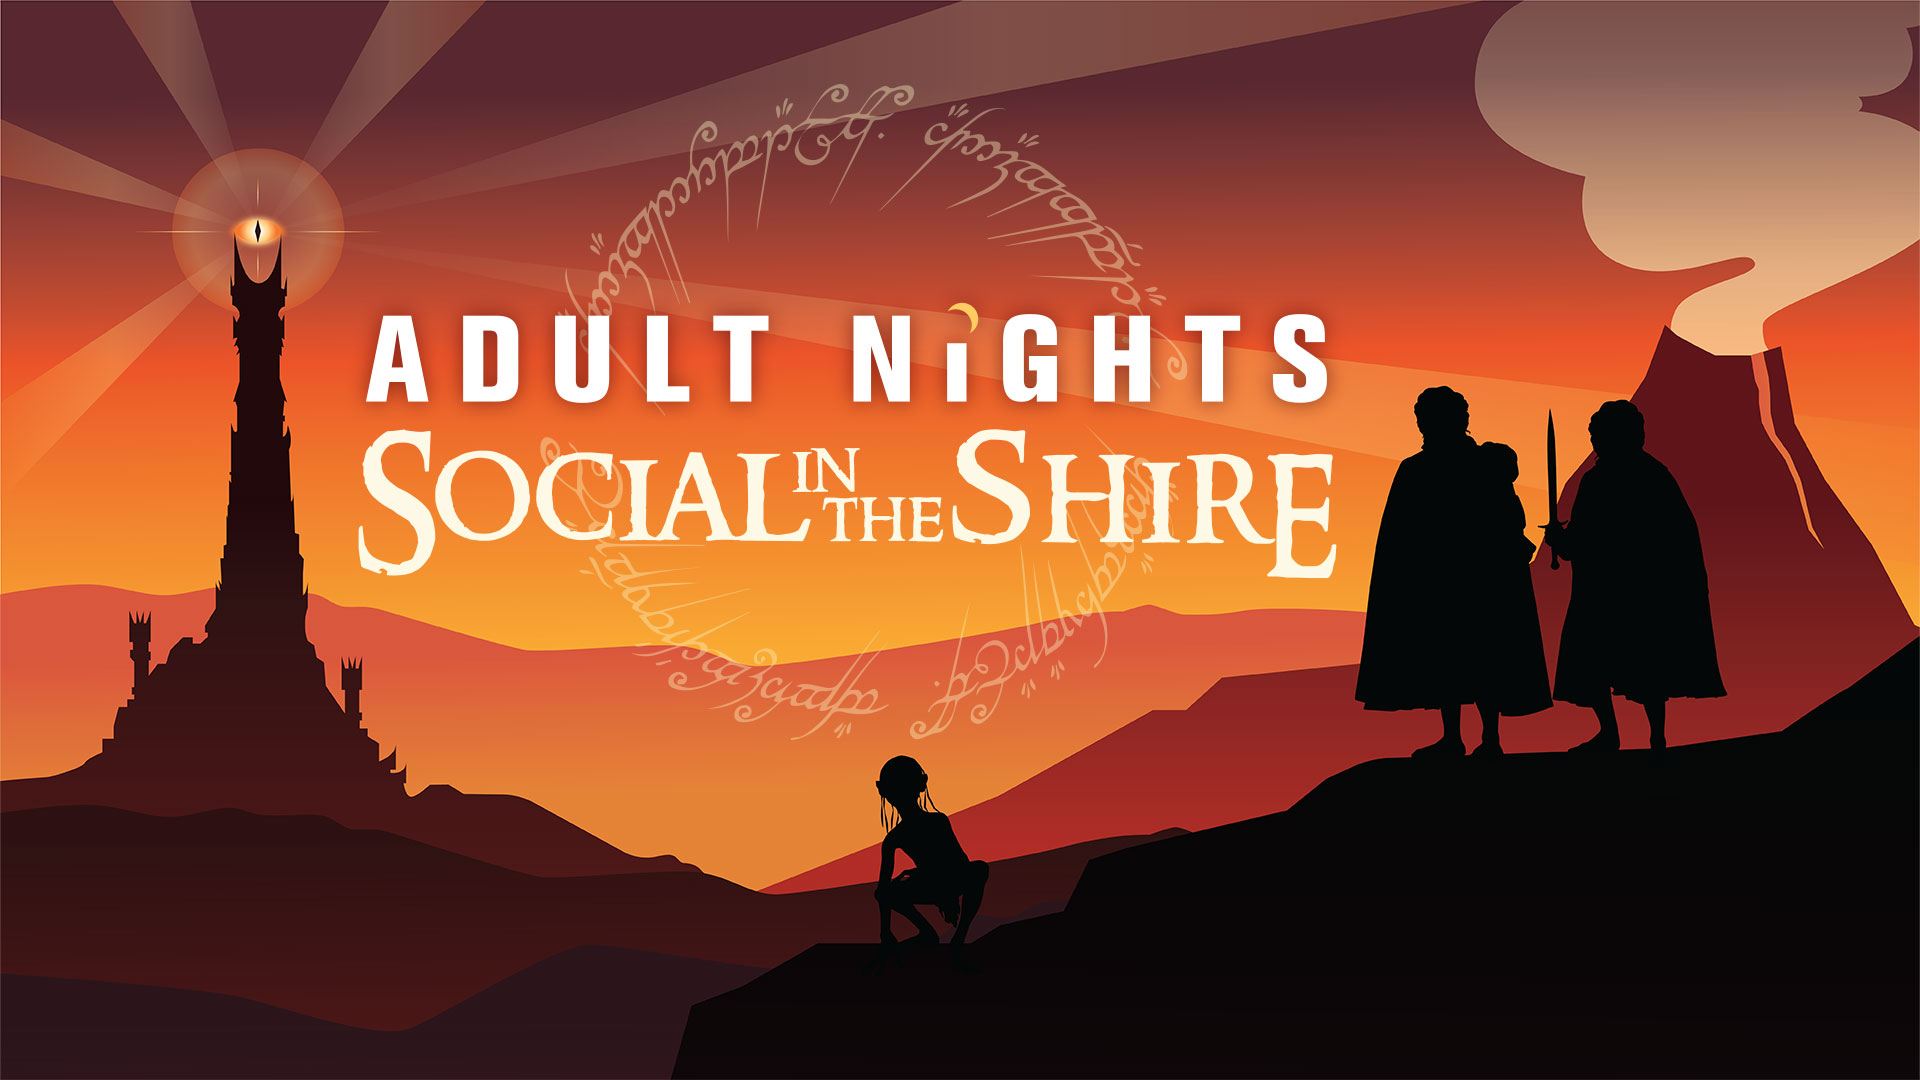 Adult Nights: Social in the Shire, February 24